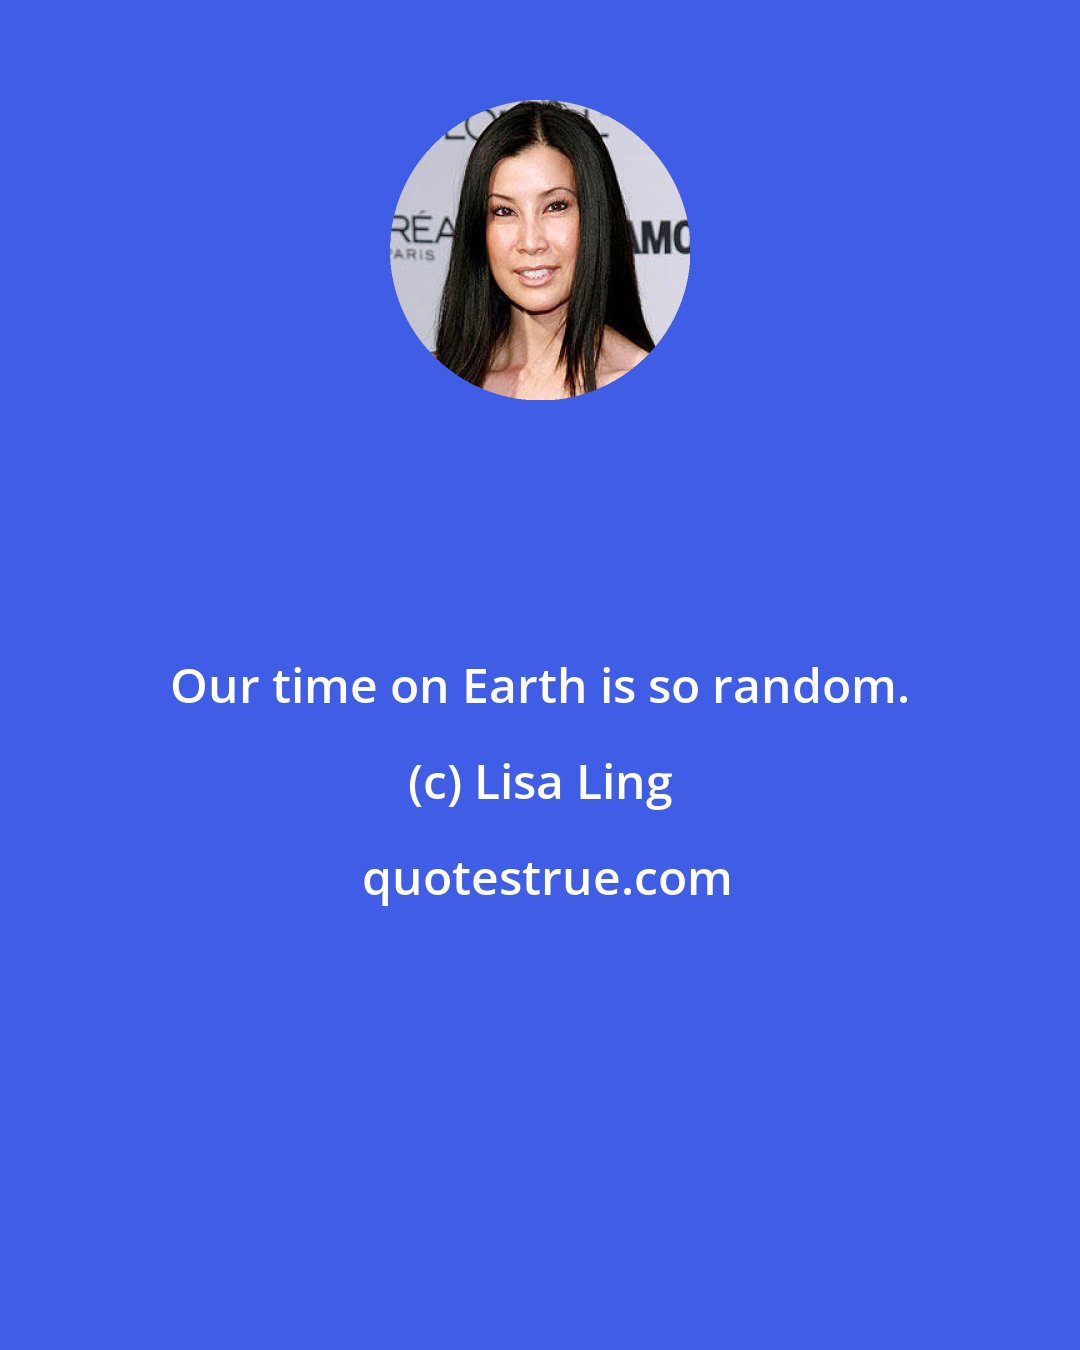 Lisa Ling: Our time on Earth is so random.